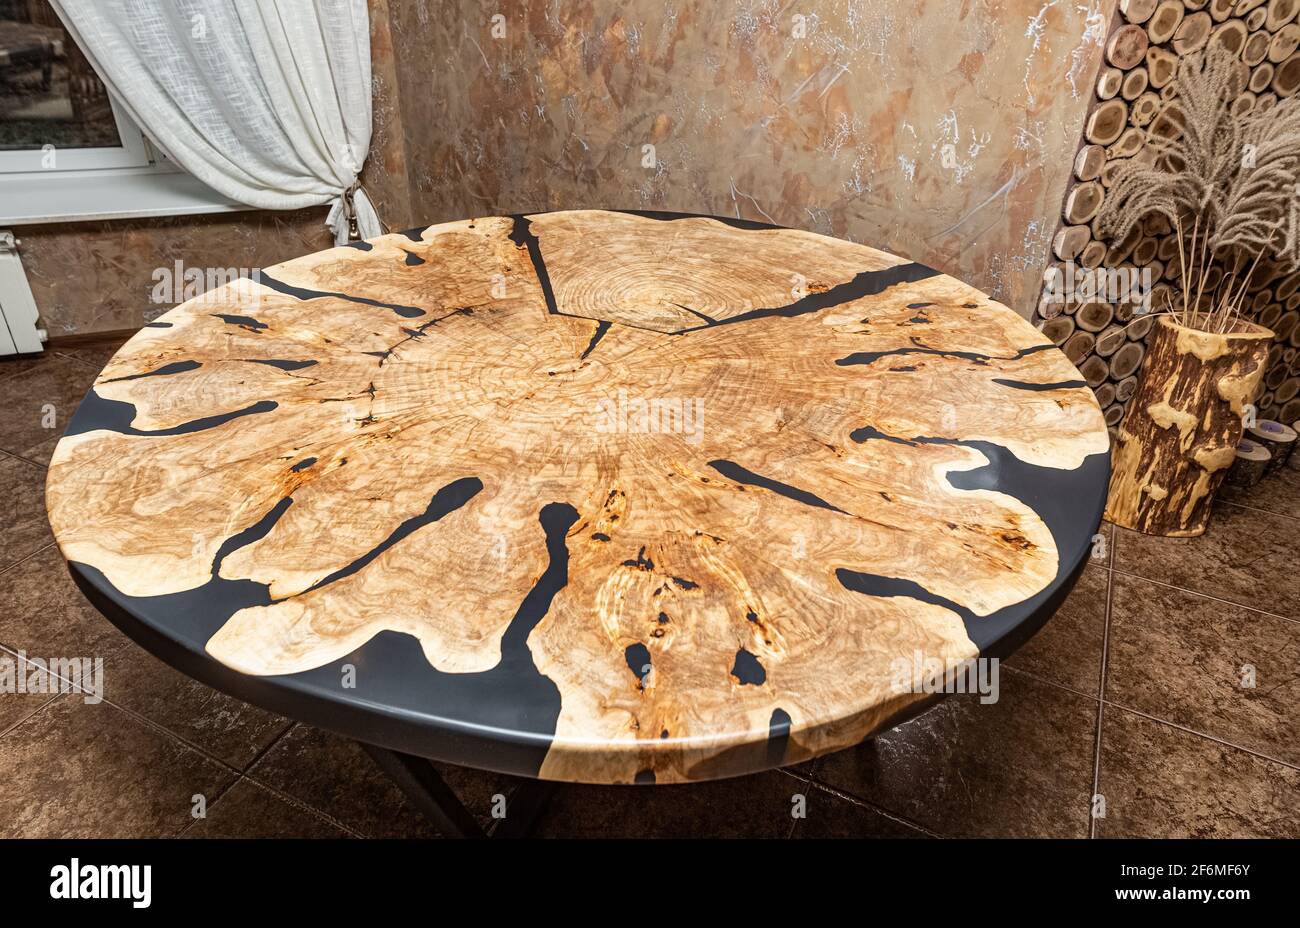 Textured table. Handmade wood products. Stock Photo